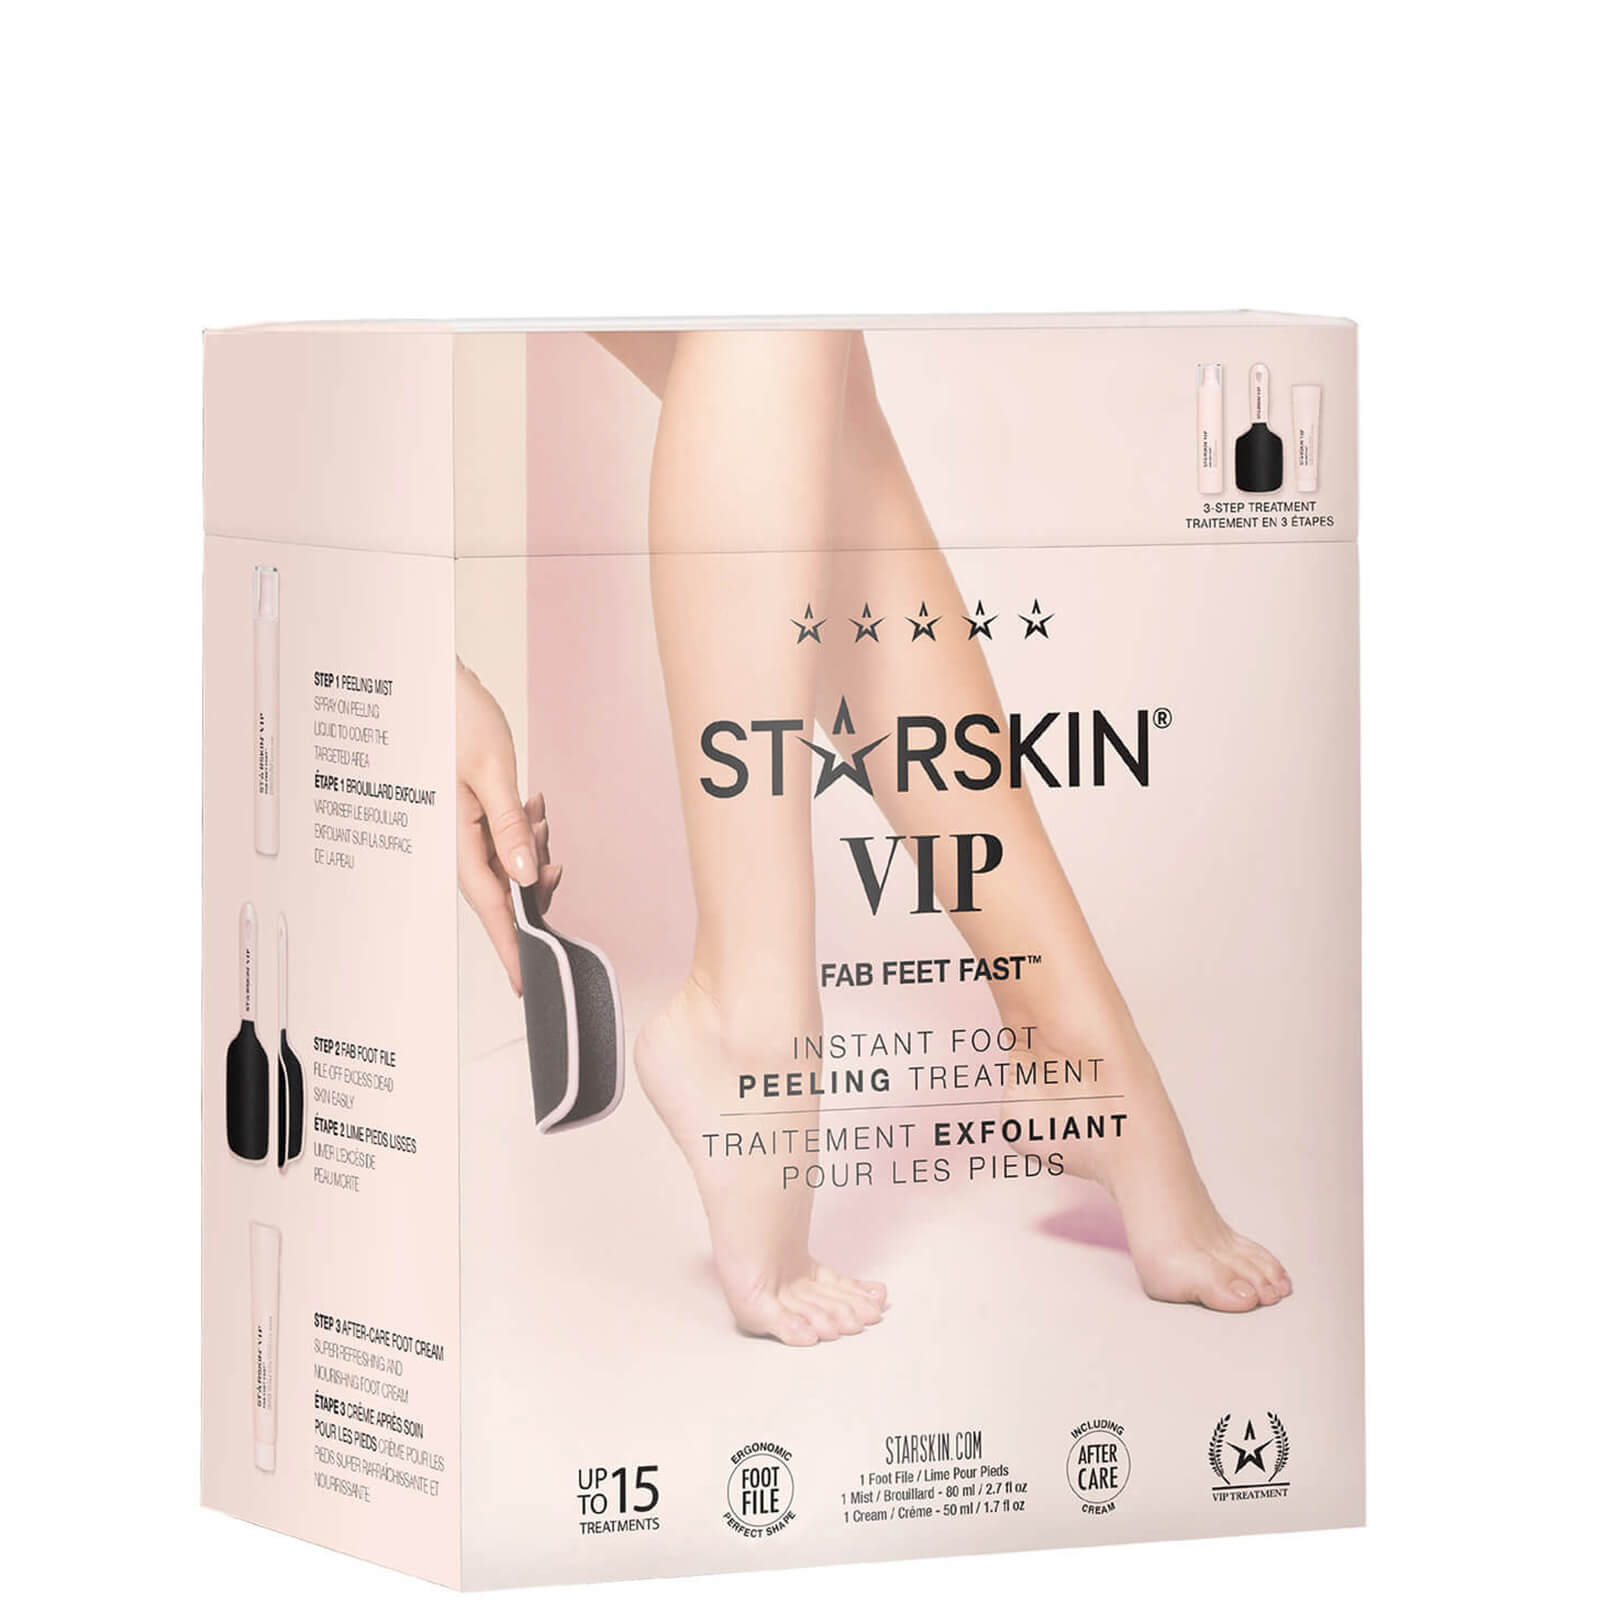 Photos - Facial / Body Cleansing Product STARSKIN VIP Fab Feet Fast Instant Foot Peeling Treatment SST027